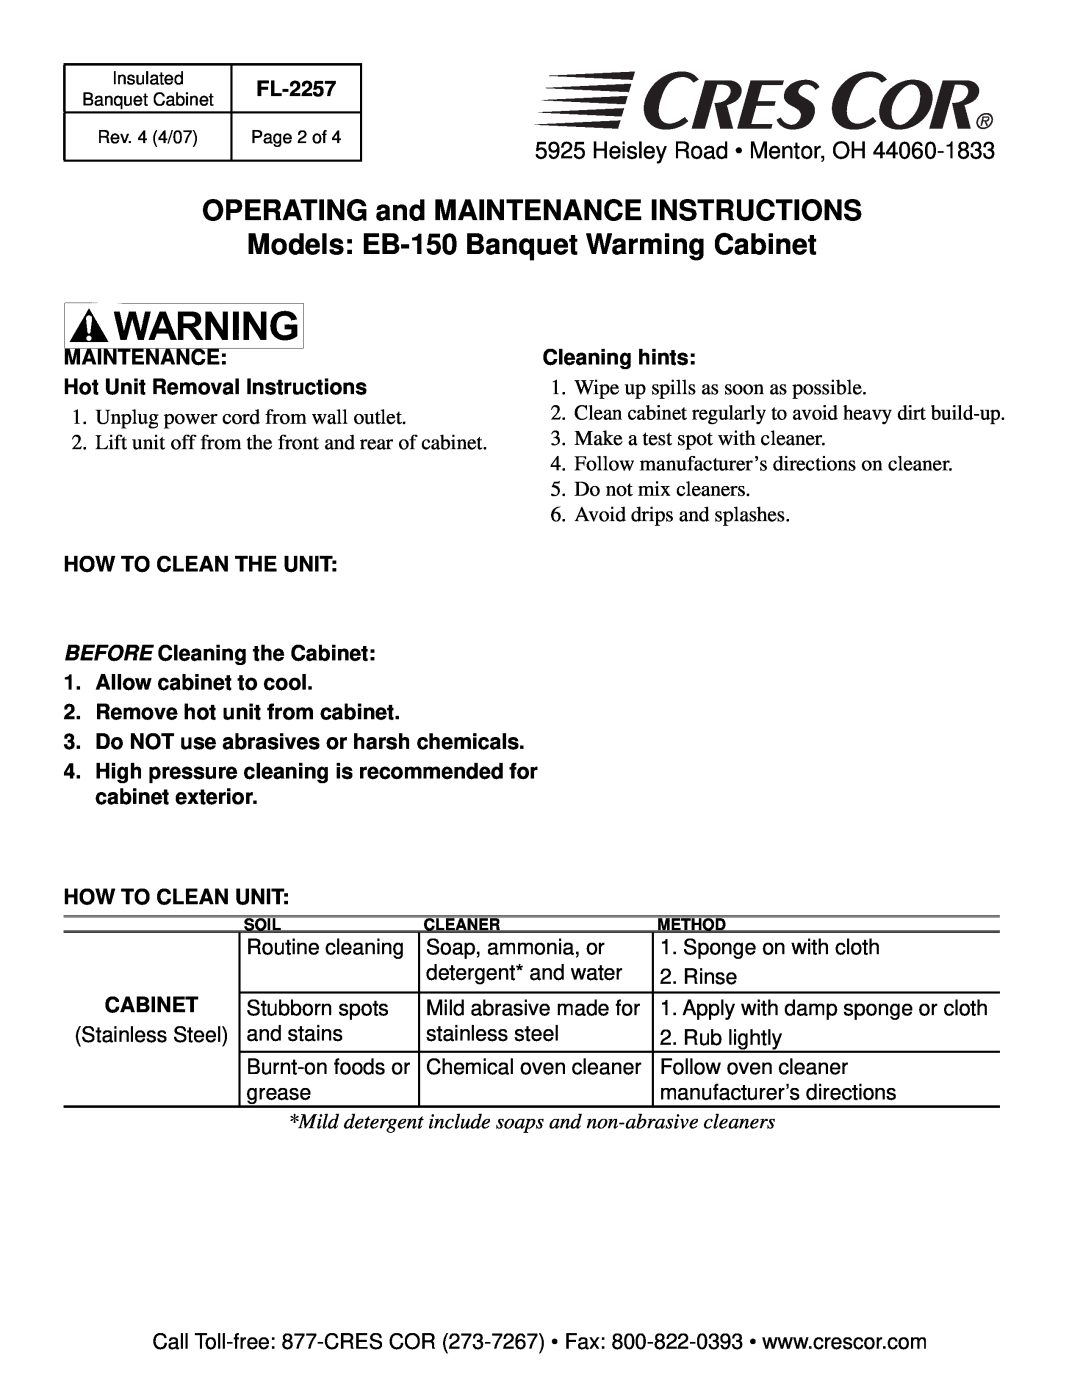 Cres Cor OPERATING and MAINTENANCE INSTRUCTIONS, Models EB-150Banquet Warming Cabinet, Heisley Road Mentor, OH, FL-2257 